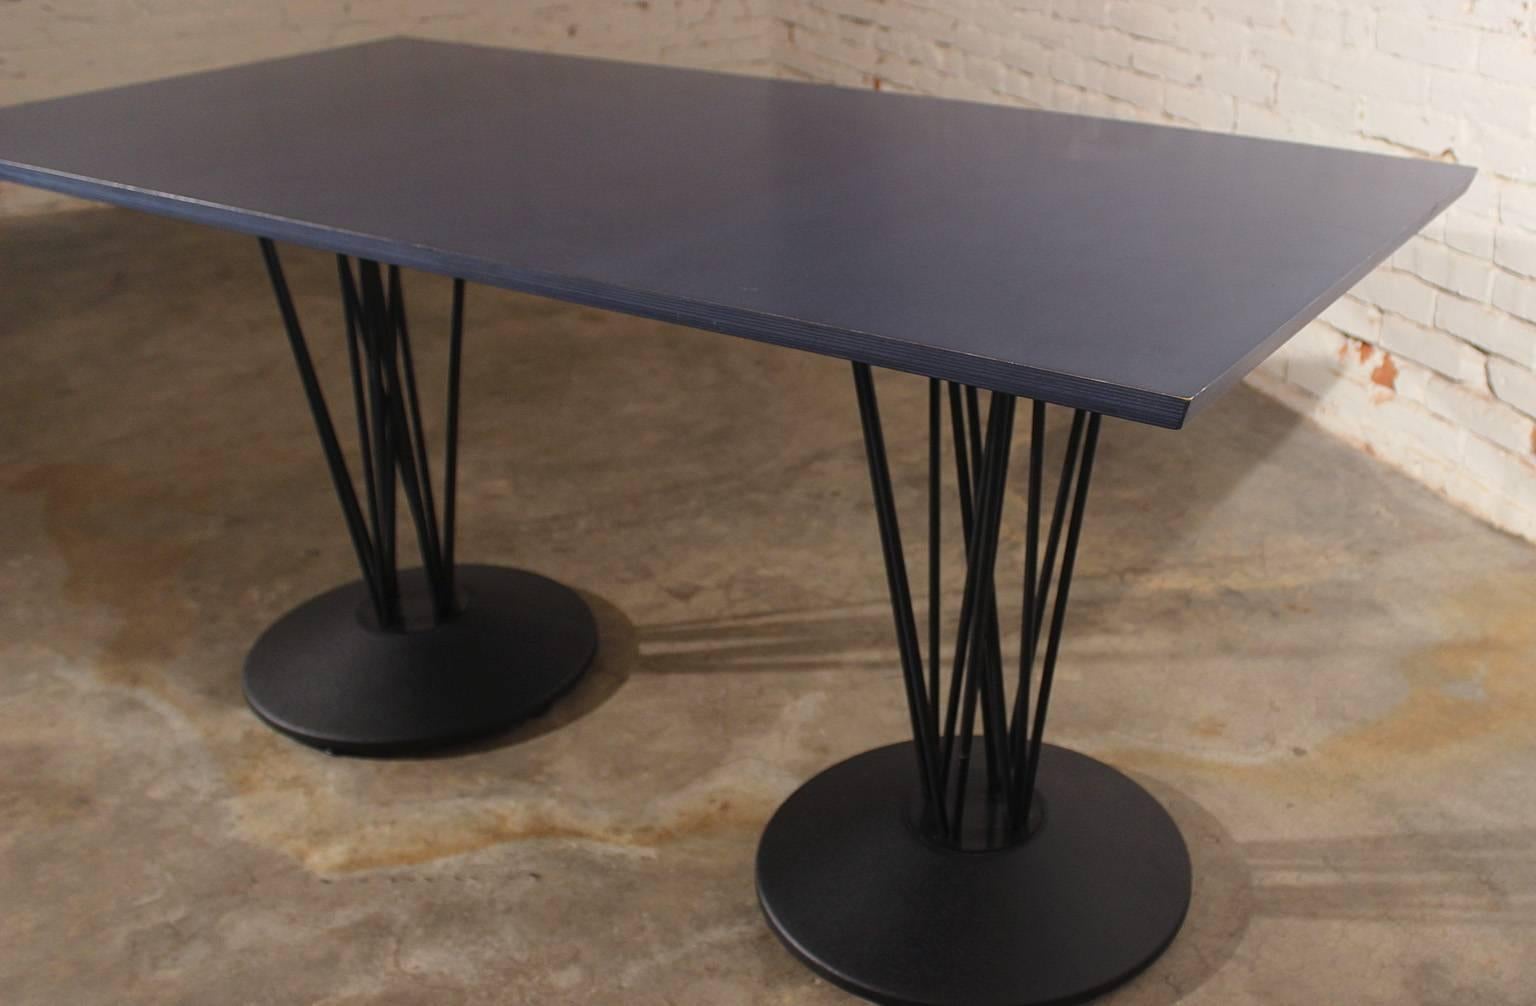 Blue Marquette double pedestal table by Leland International. In wonderful condition and ready to use. Very cool size and style and incredibly sturdy.

Really cool Marquette double pedestal table by Leland International. The blue plywood table top